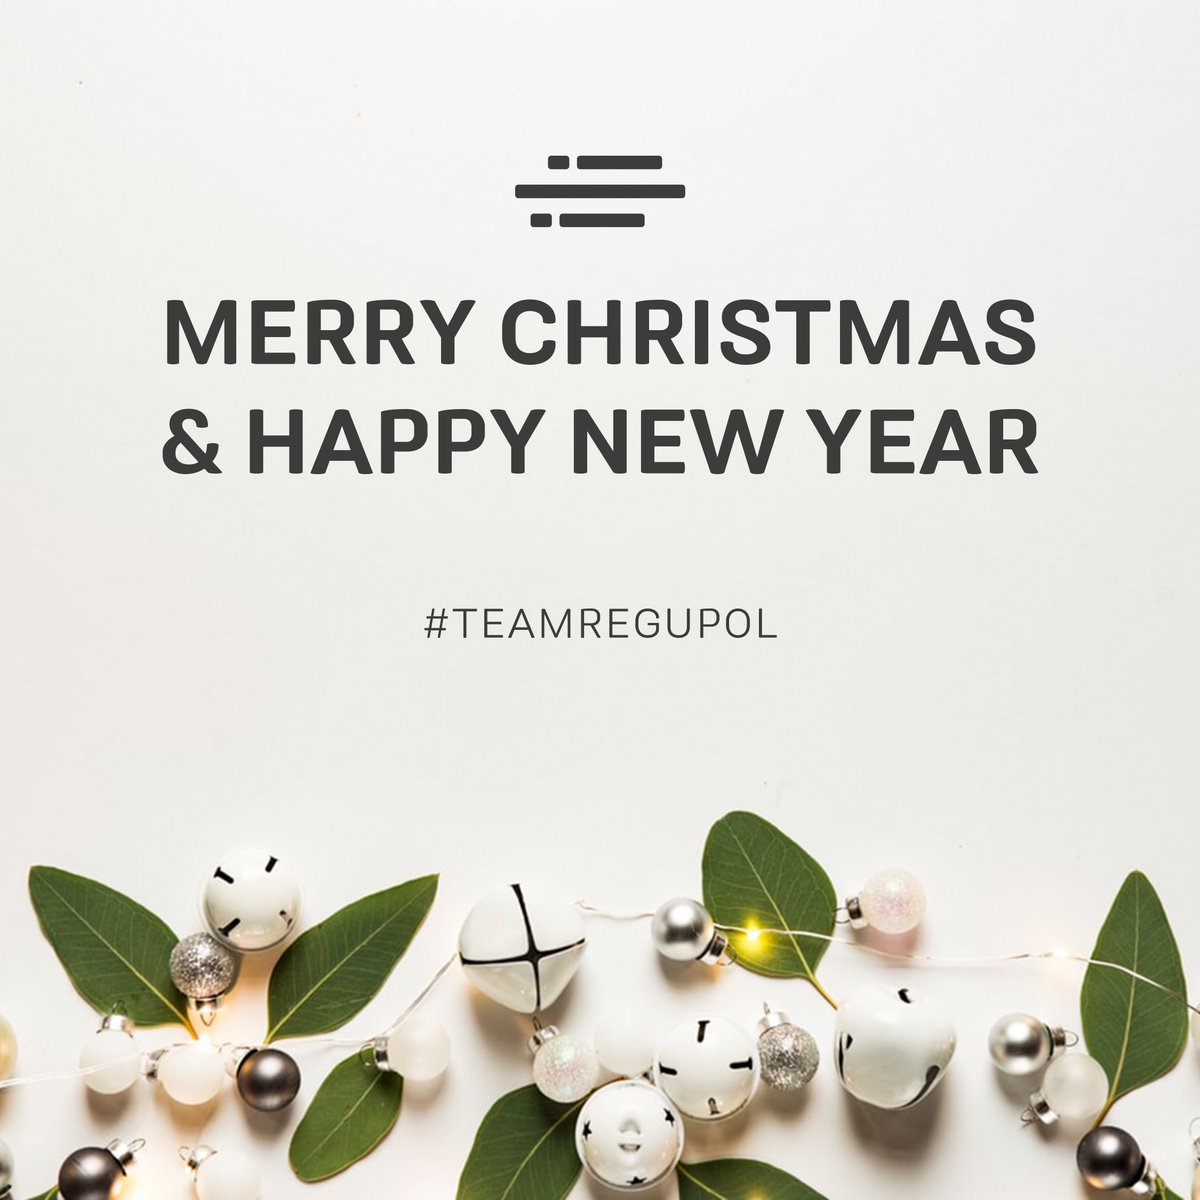 Merry Christmas and Happy New Year! Our offices will be closed over the Christmas and New Year periods, please check with your local REGUPOL for exact dates. #TeamRegupol